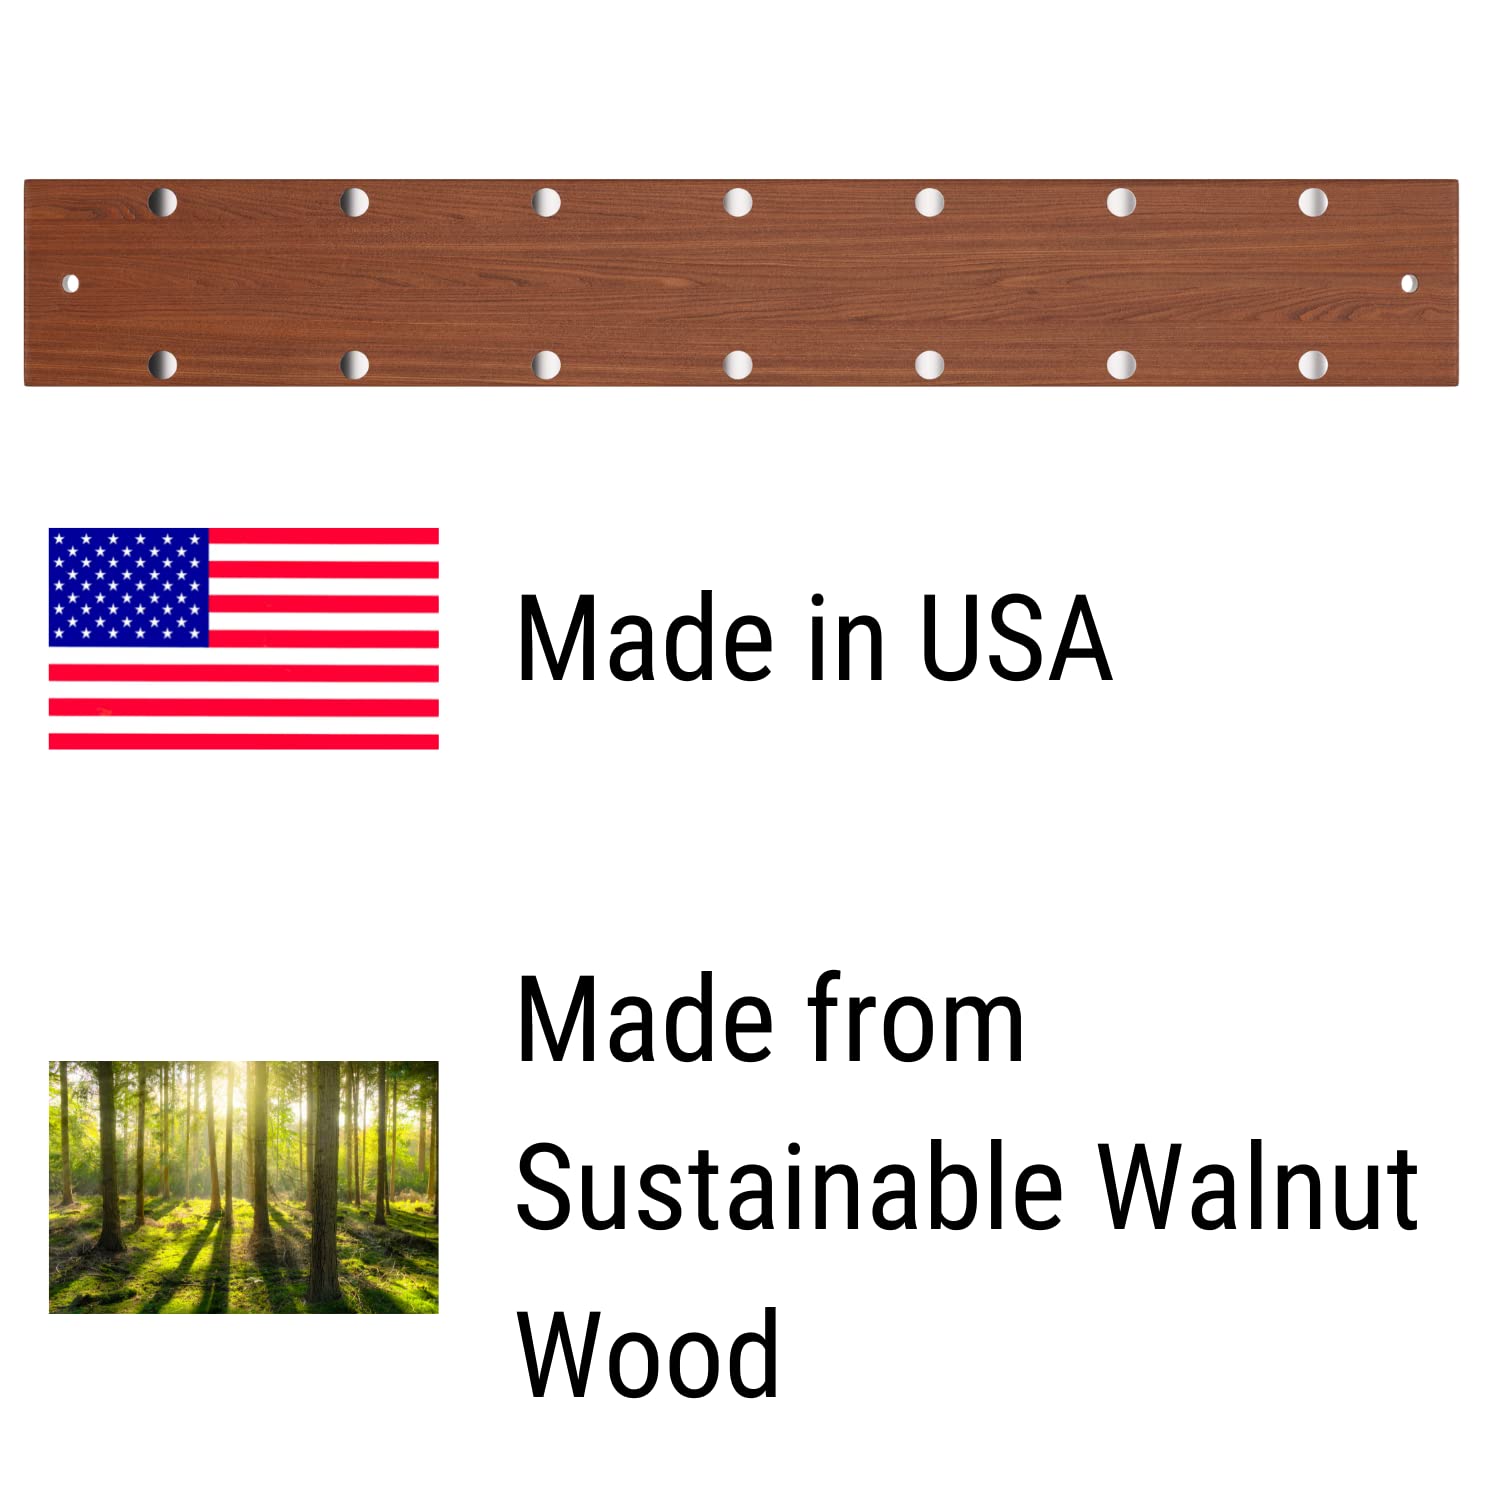 Virginia Boys Kitchens Powerful Magnetic Knife and Kitchen Tool Strip, Holder Made in USA with Black American Walnut Wood (16 inch)